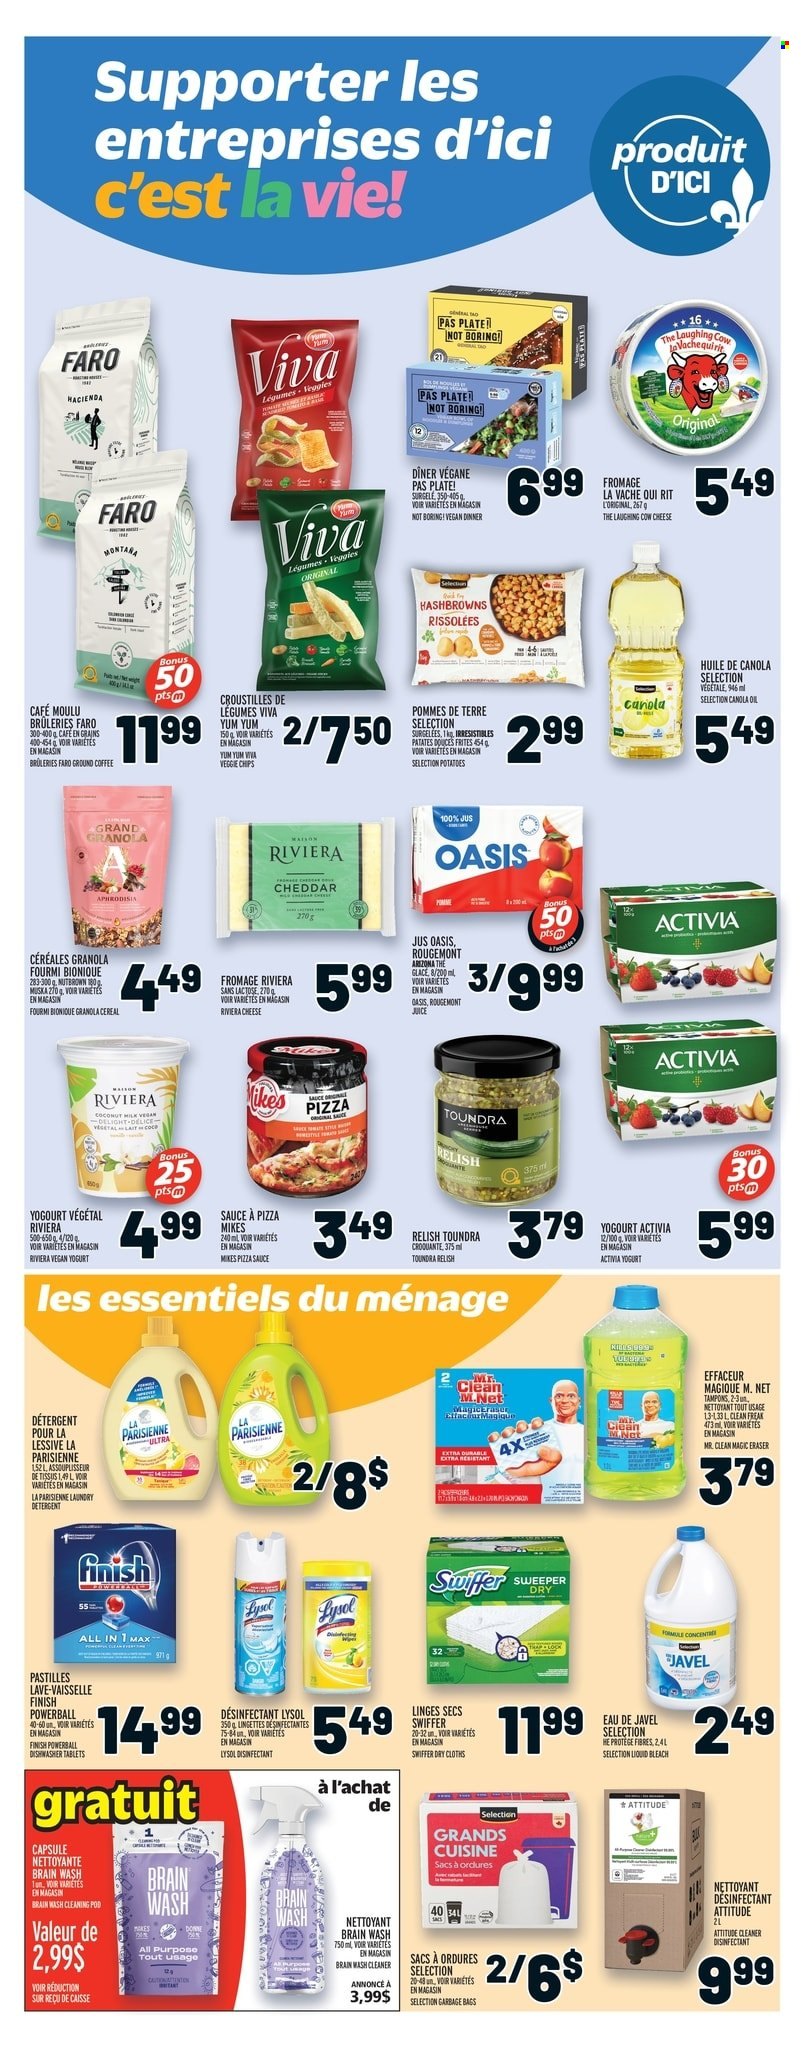 thumbnail - Metro Flyer - December 01, 2022 - December 07, 2022 - Sales products - potatoes, sauce, The Laughing Cow, yoghurt, Activia, hash browns, pastilles, chips, coconut milk, cereals, canola oil, oil, juice, AriZona, coffee, ground coffee, cleaner, bleach, Lysol, Swiffer, laundry detergent, dishwasher cleaner, Finish Powerball, dishwasher tablets, tampons, plate, eraser, detergent, granola, desinfection. Page 17.